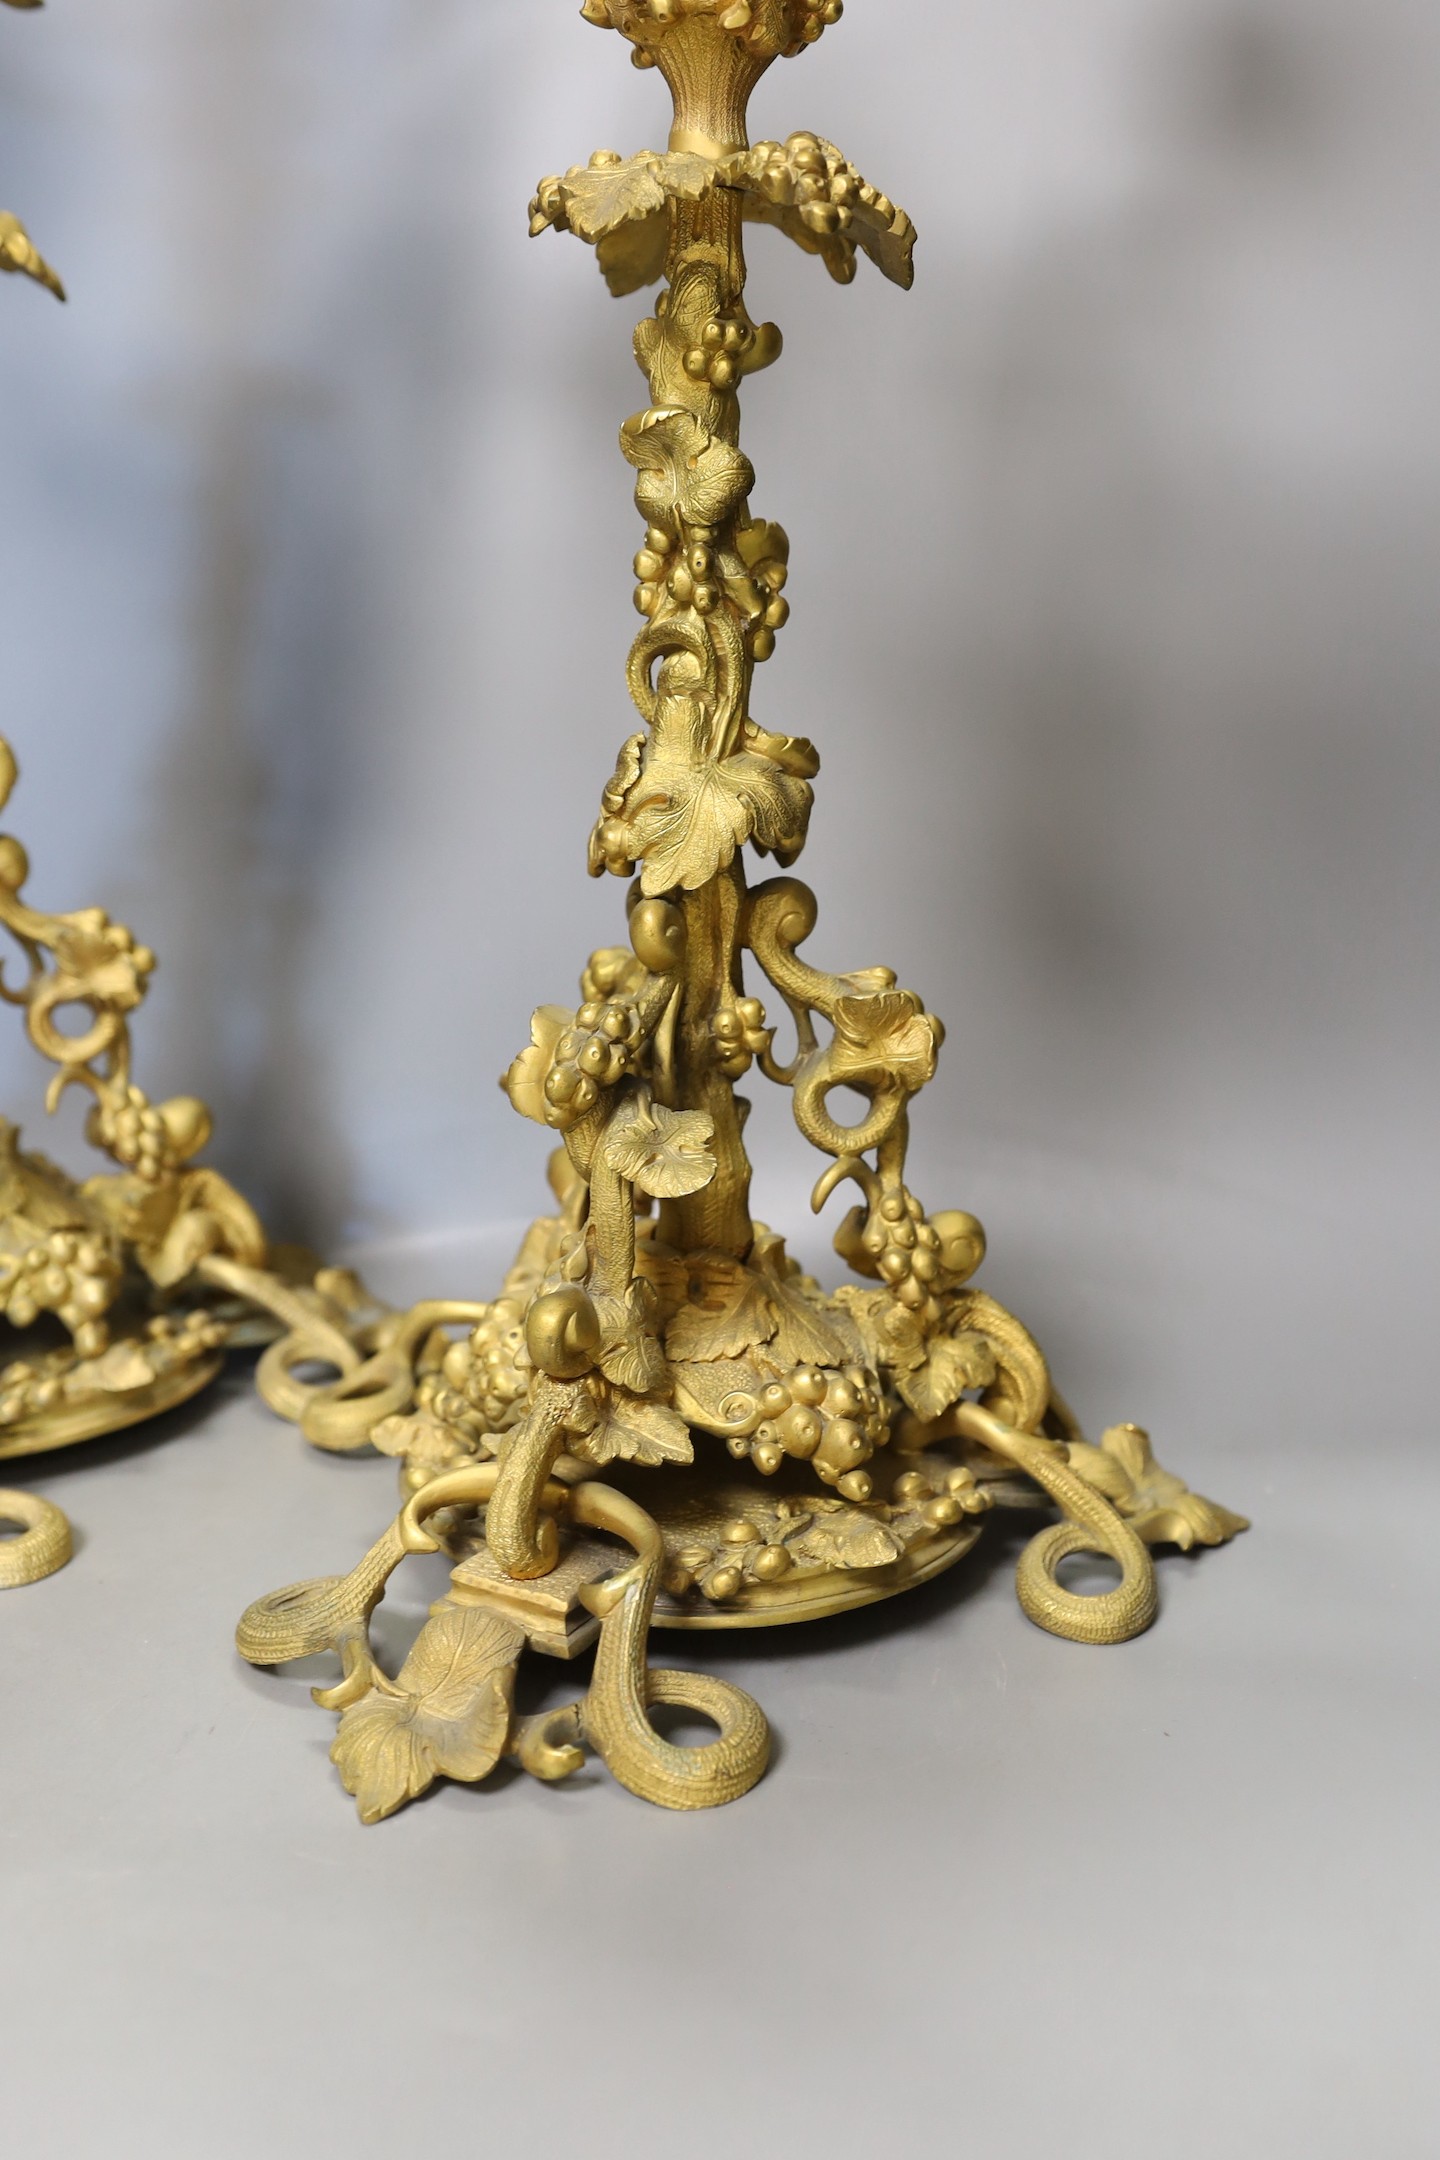 A pair of Victorian ormolu 4-light candelabra with vineous stems - 56cm tall - Image 4 of 4